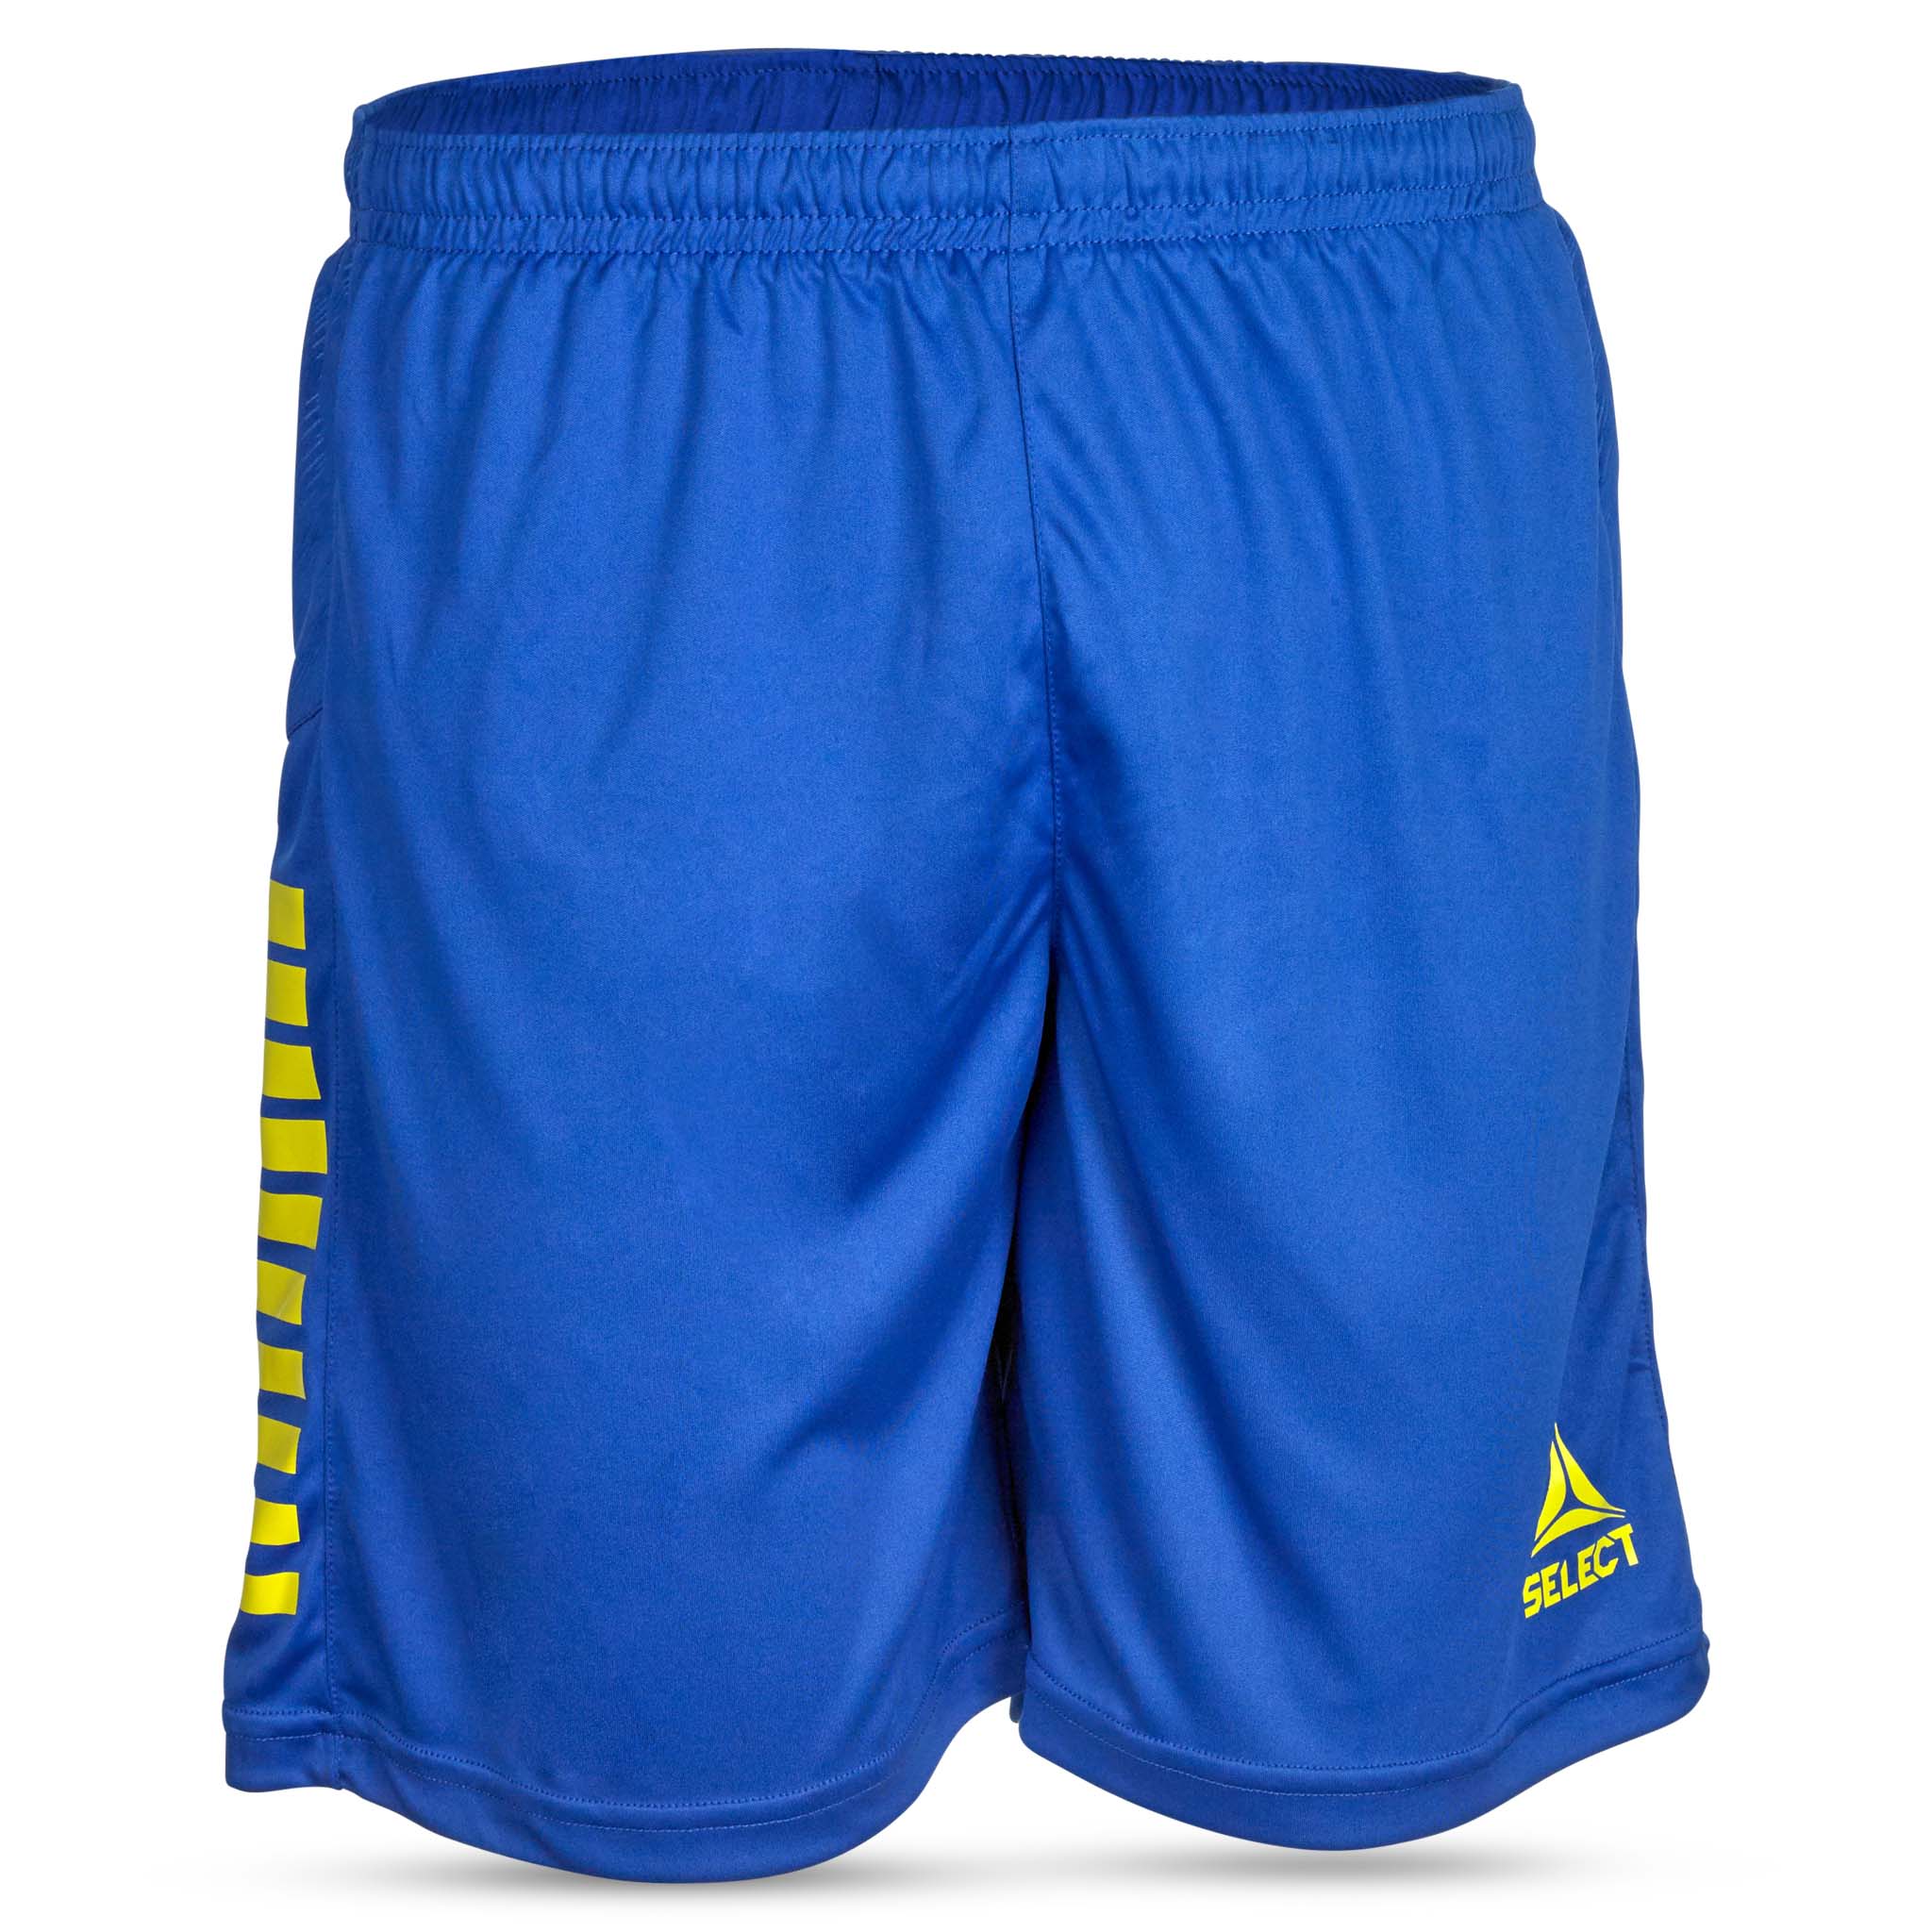 Spain Player shorts #colour_blue/yellow